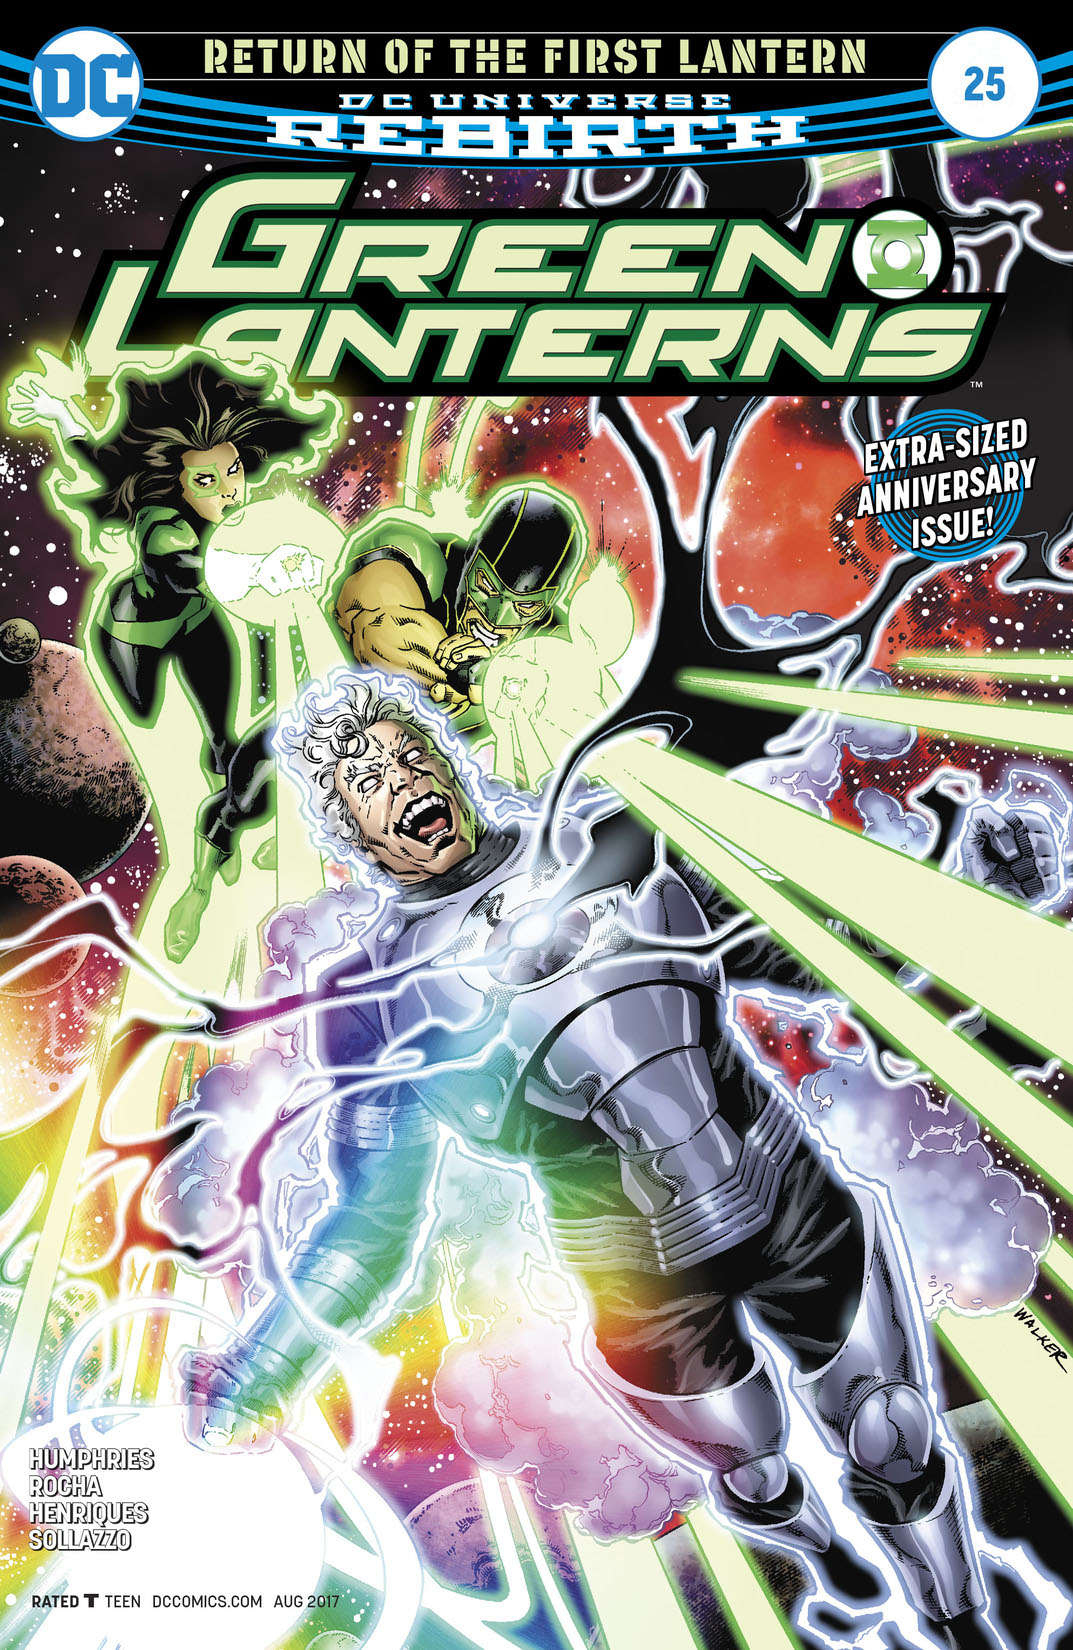 Green Lanterns #25 preview images